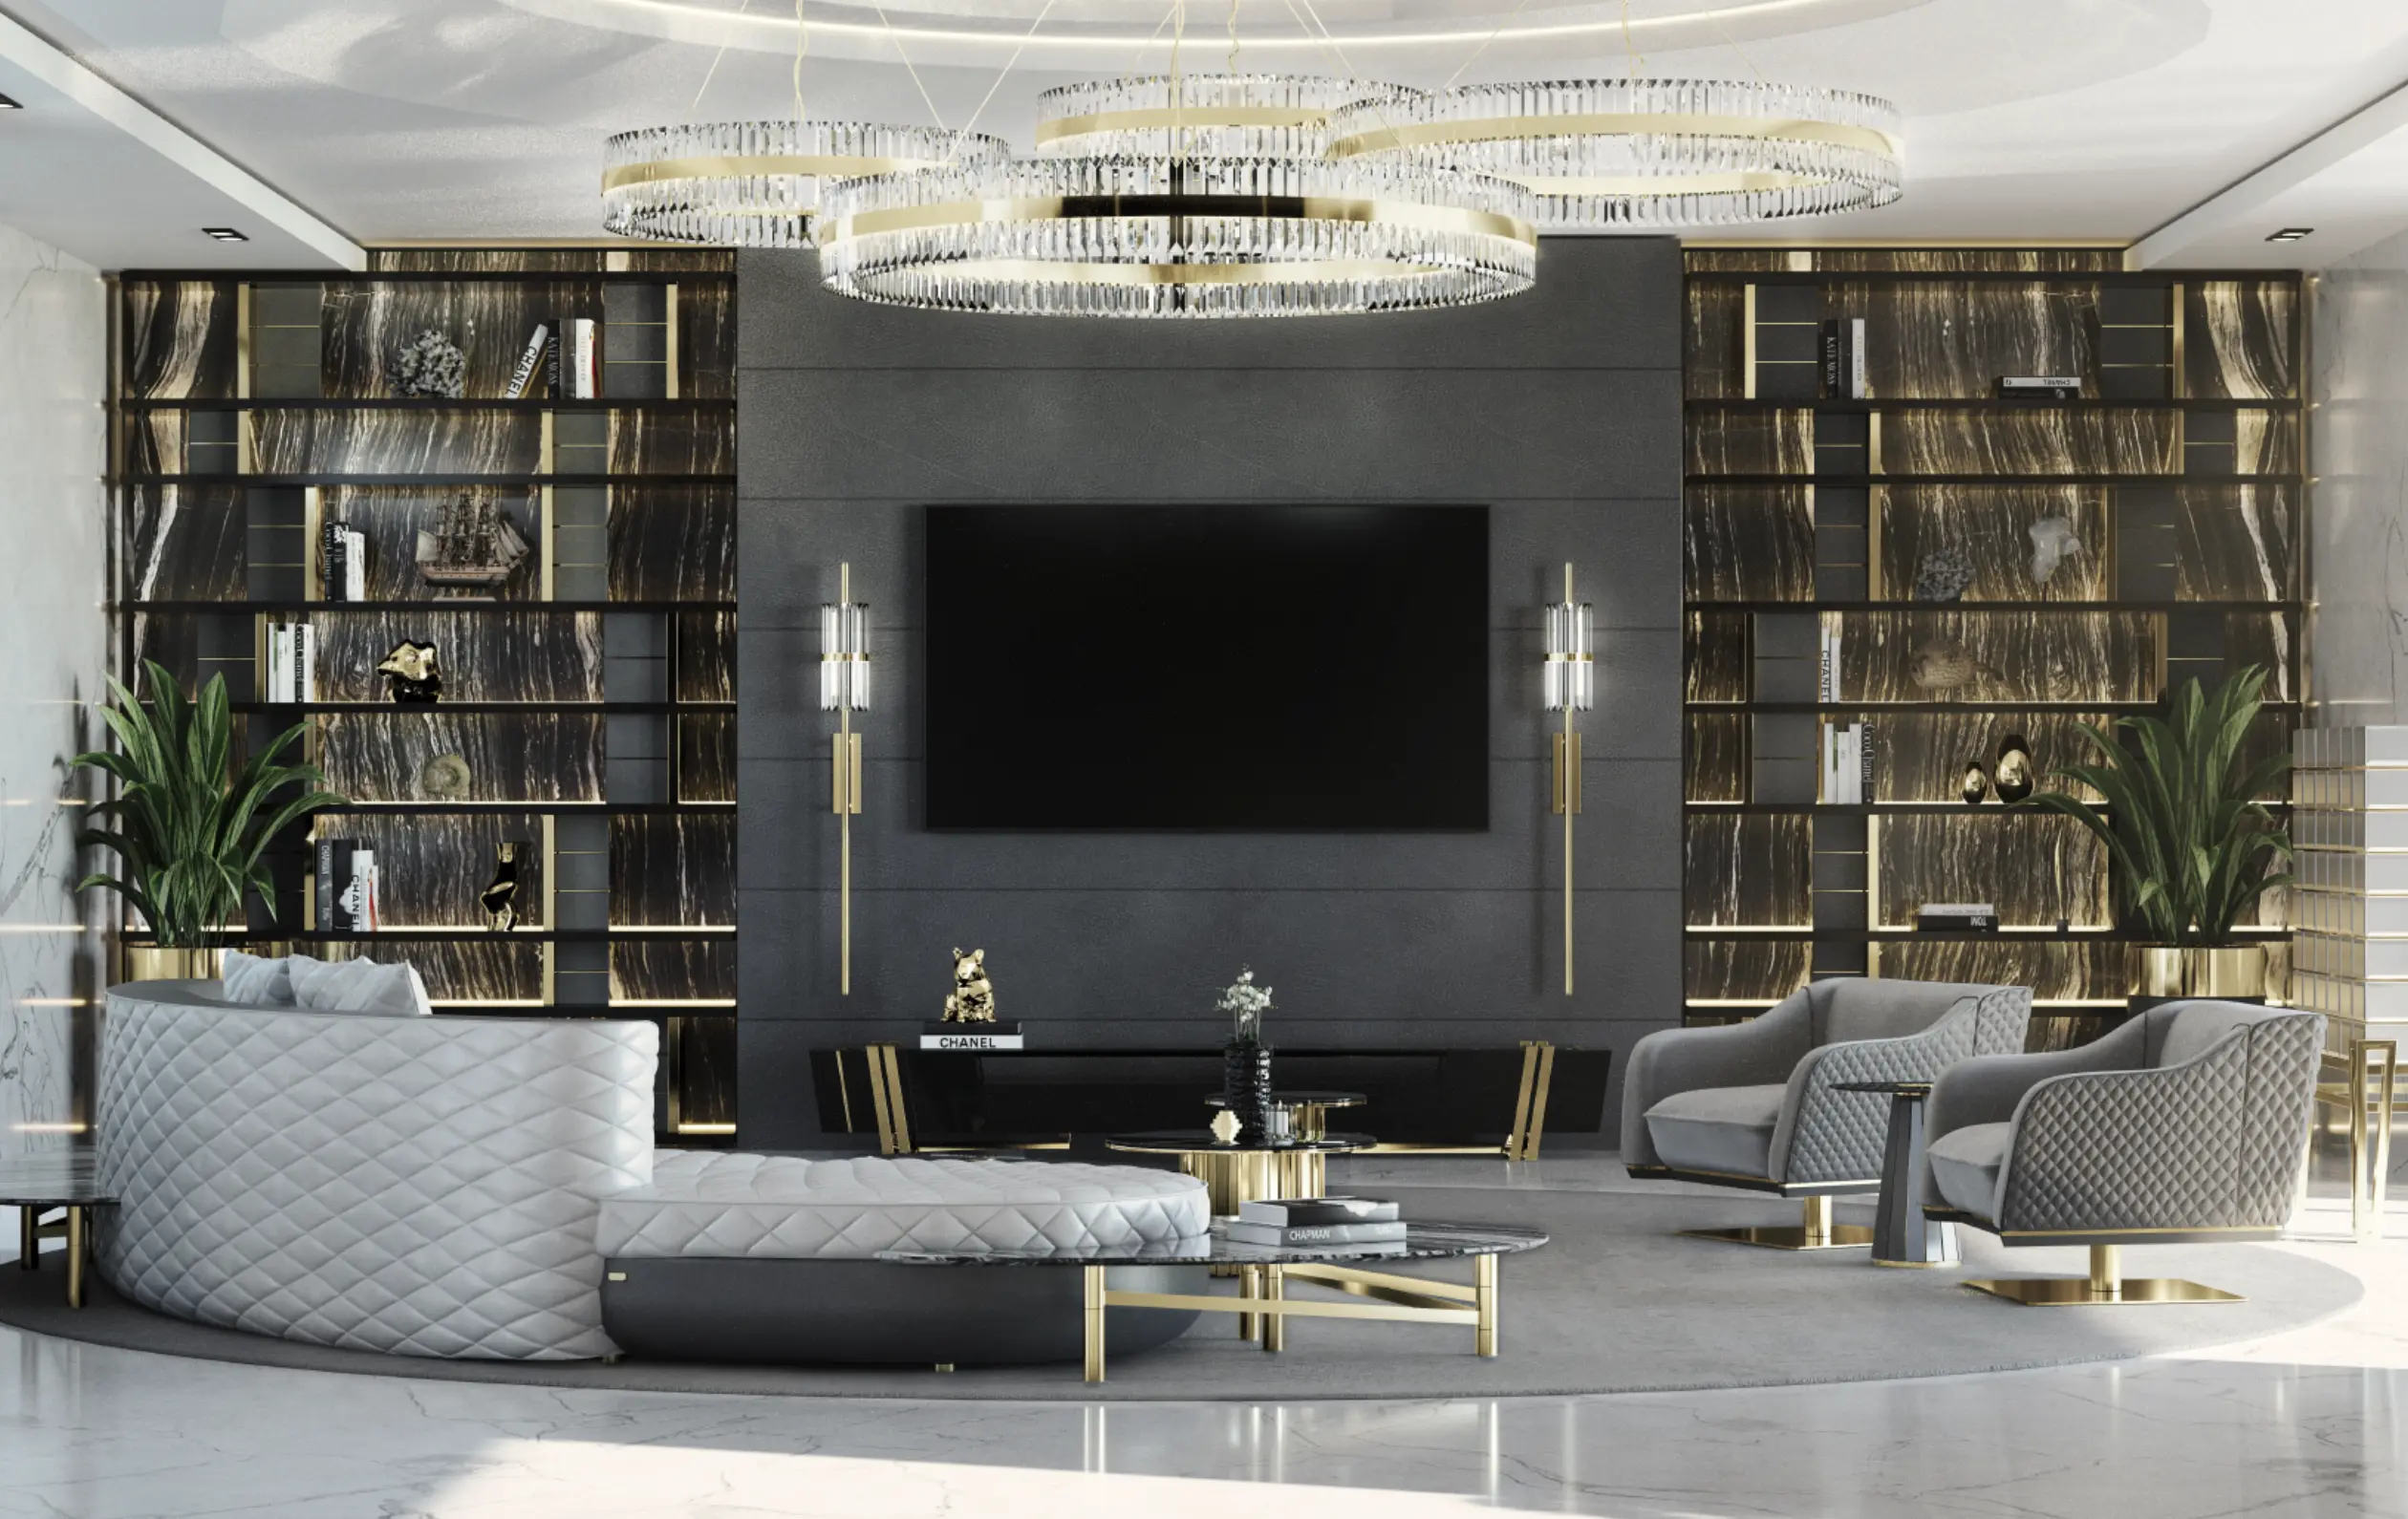 NYC - Breathtaking Sofas for your Living Room